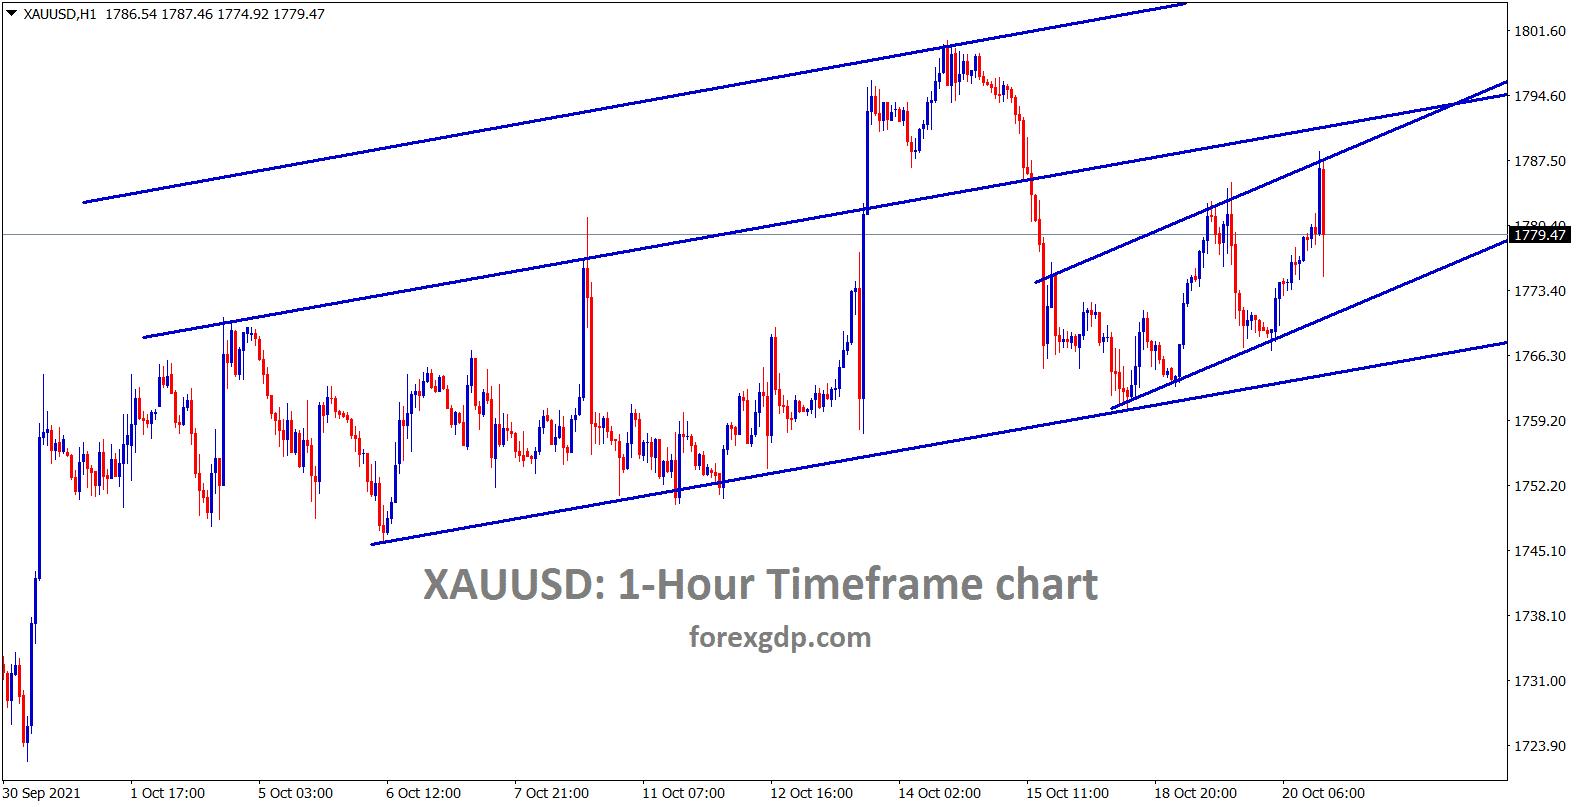 Gold is moving in an Ascending channels